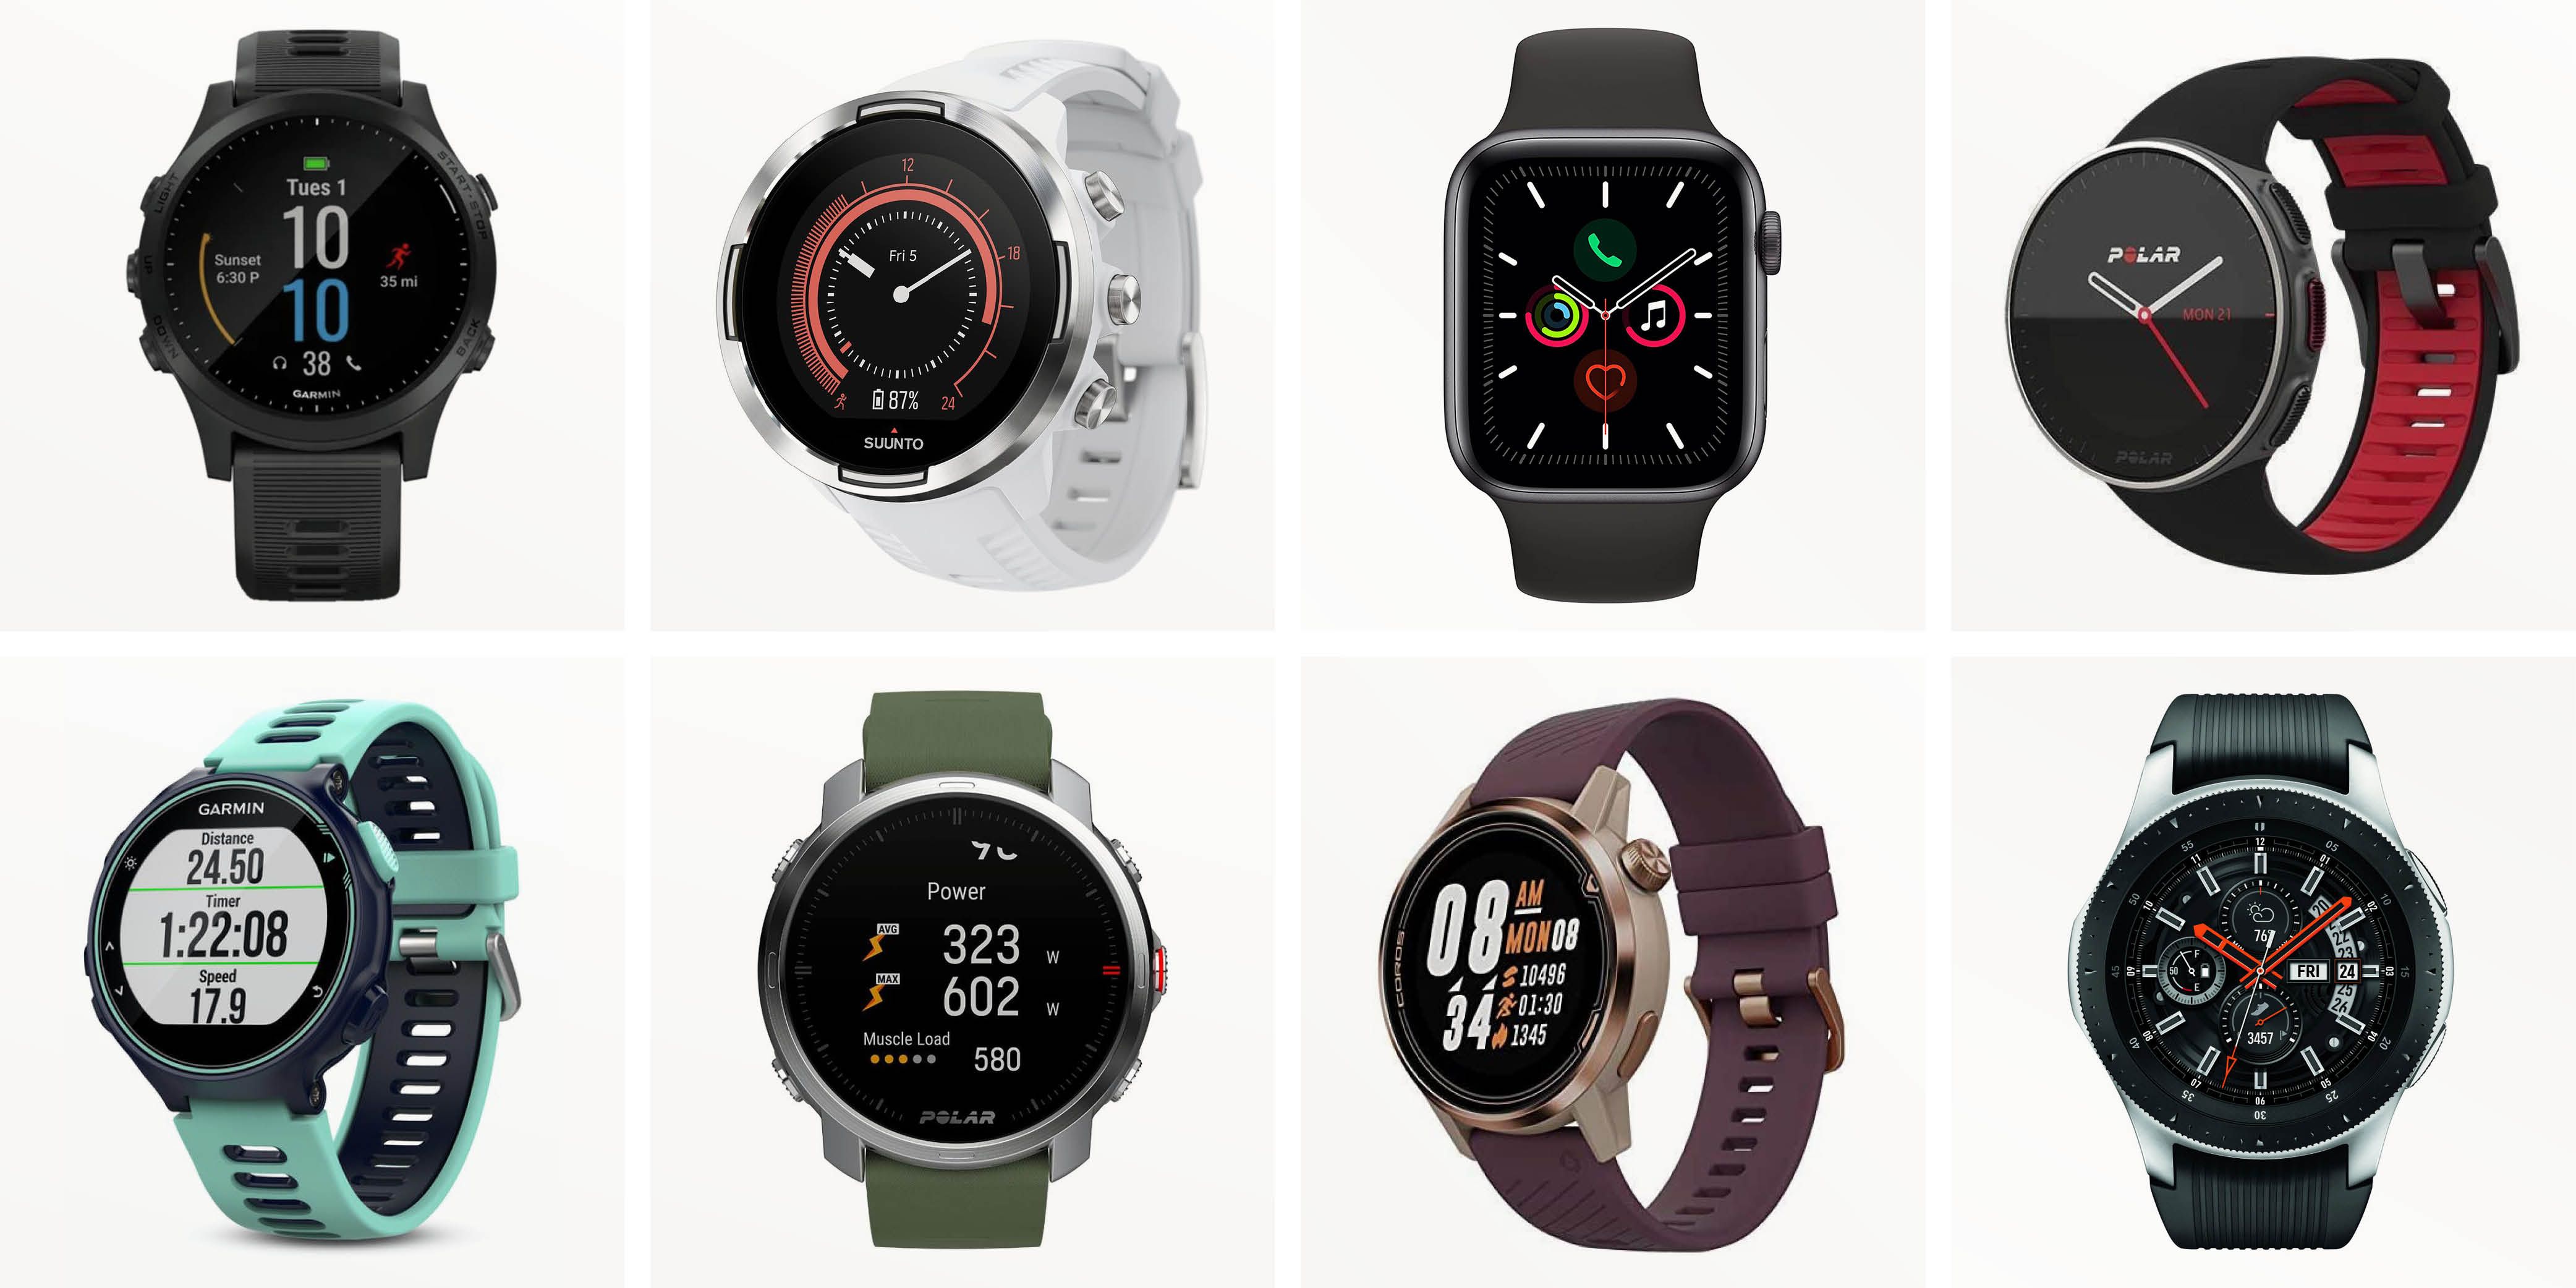 Halvtreds fortjener interferens 10 Best Smart Watches for Cyclists 2022 - GPS Watches for Cycling